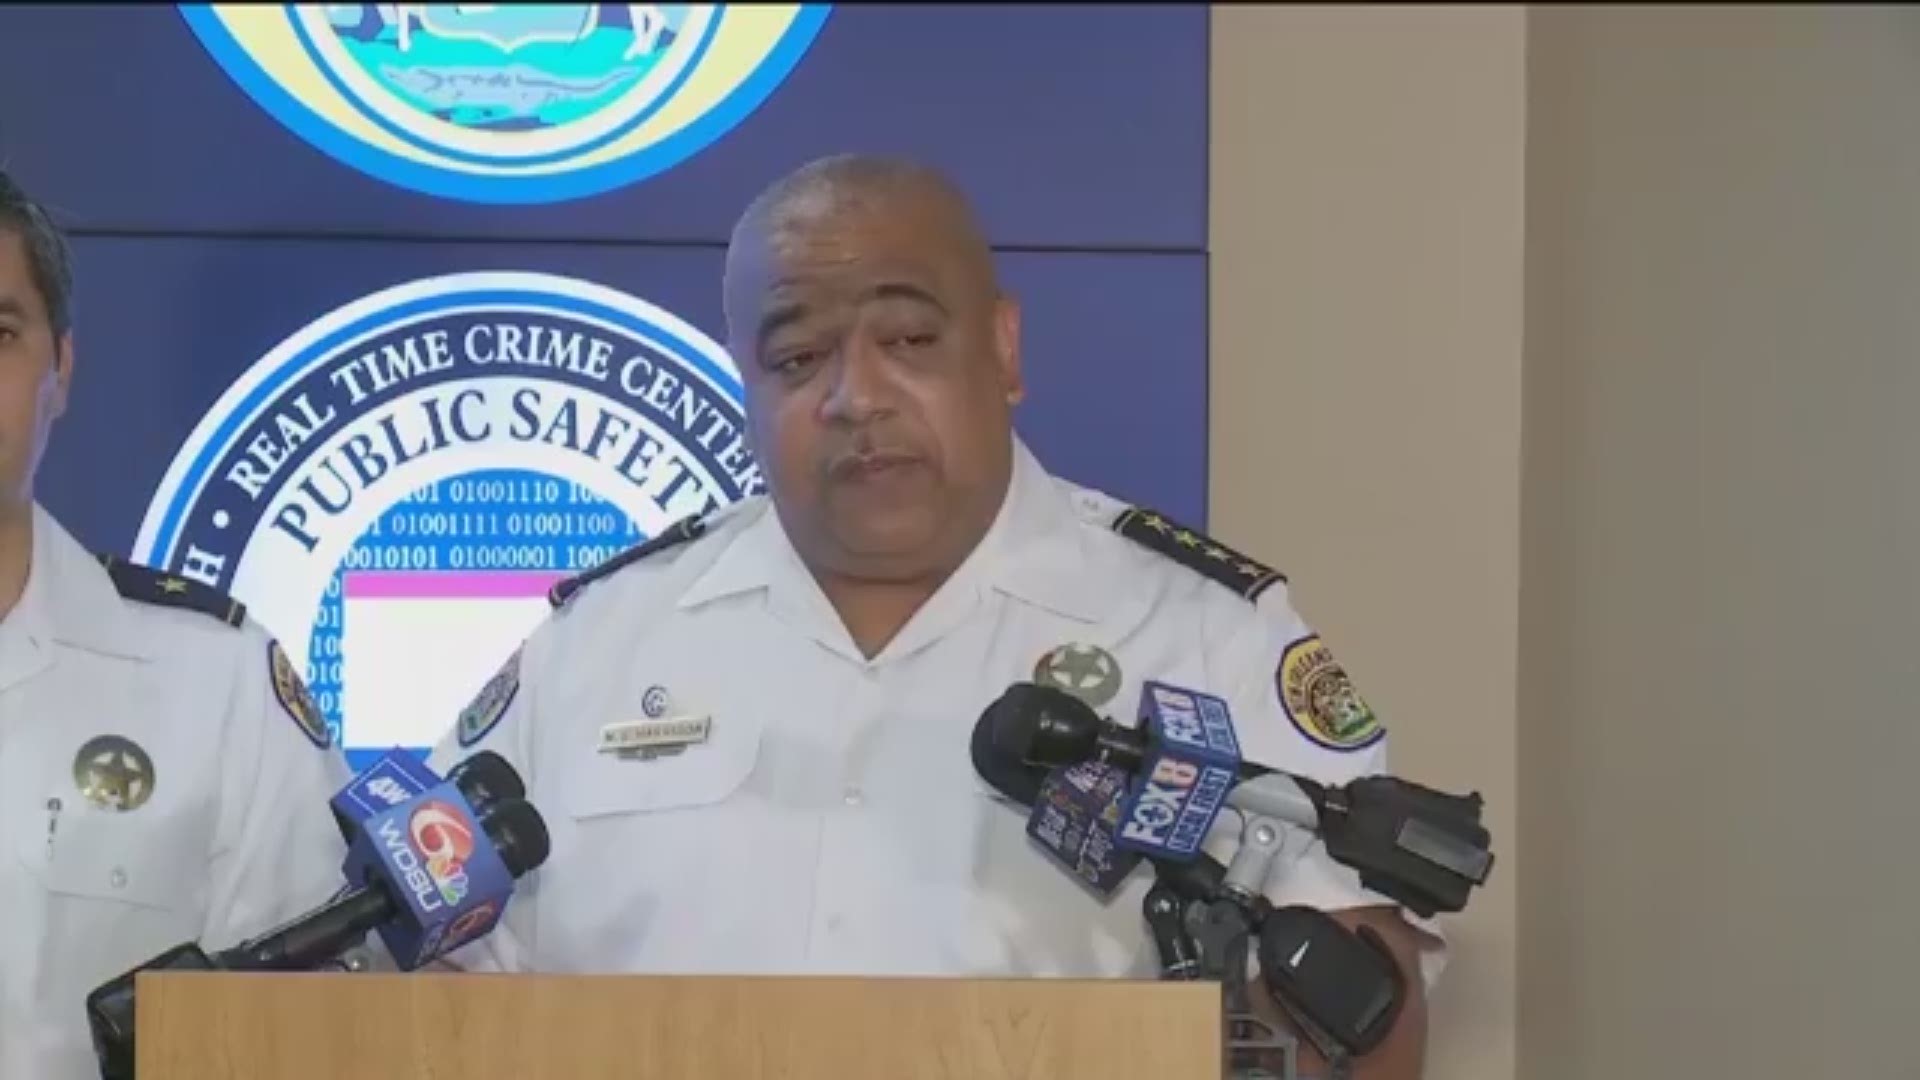 Chief Michael Harrison praised his officers for de-escalating the situation and remaining calm, even after learning one of the suspects was armed.